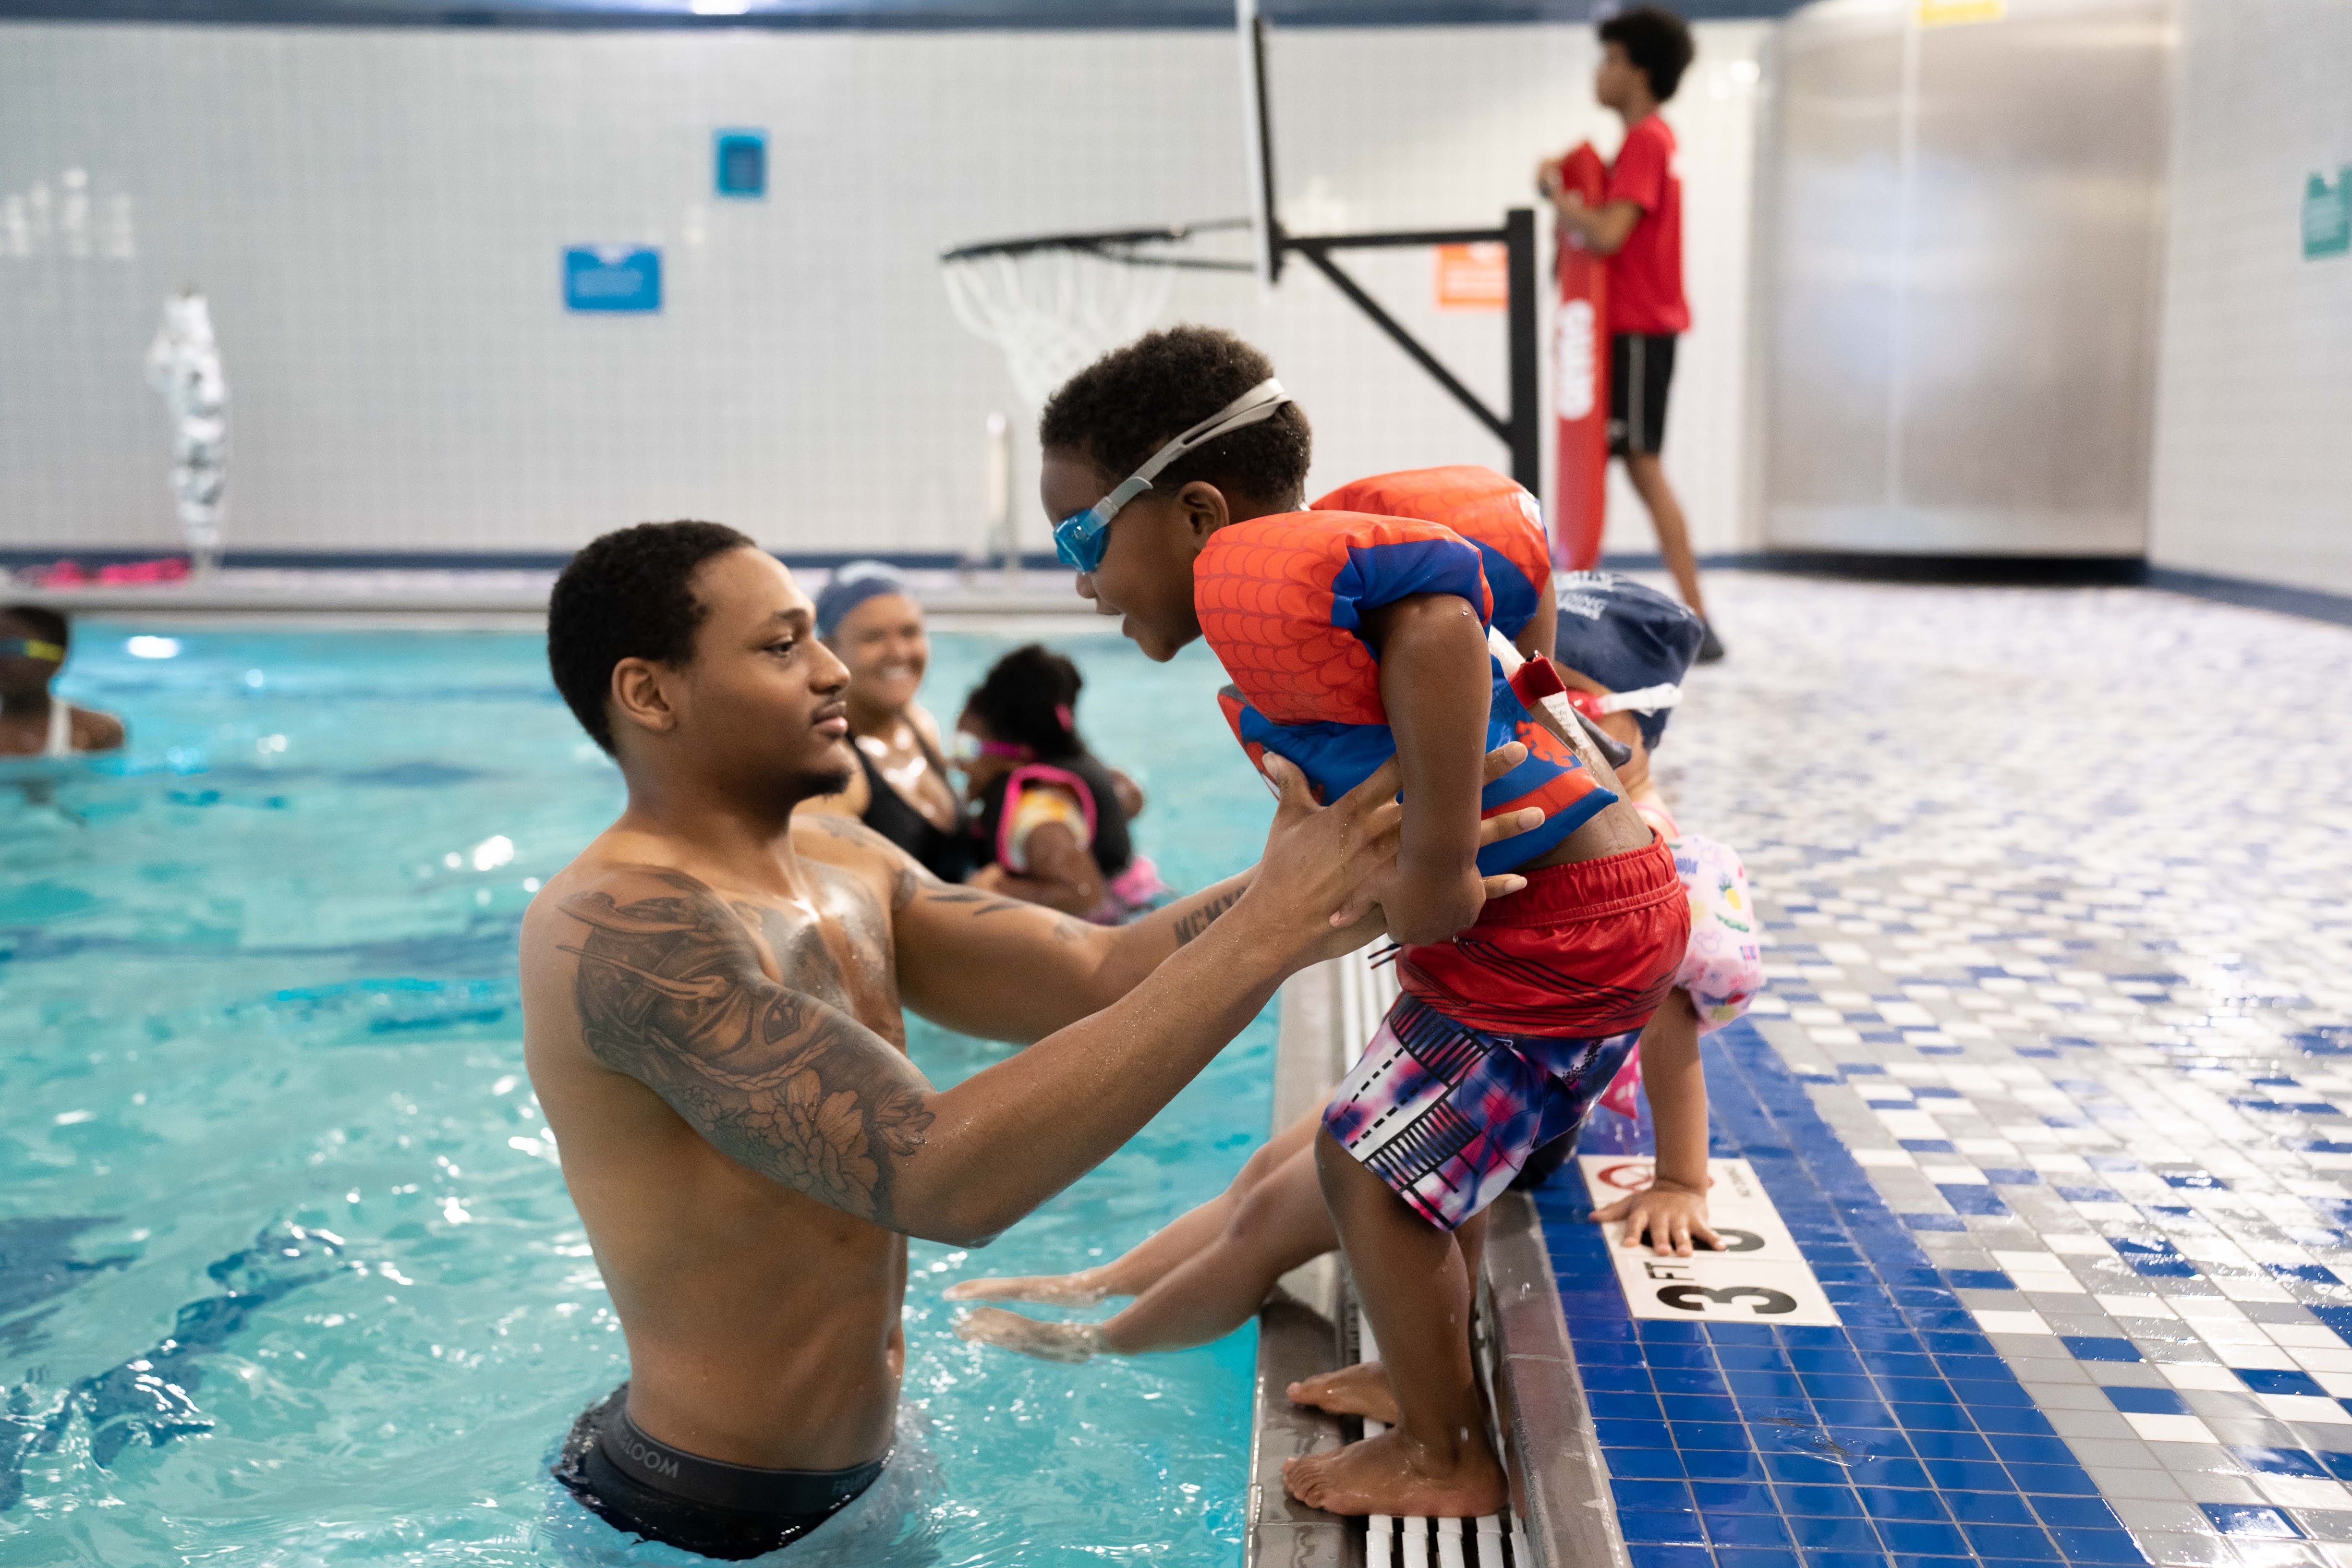 learn to swim participant jumping into pool with help